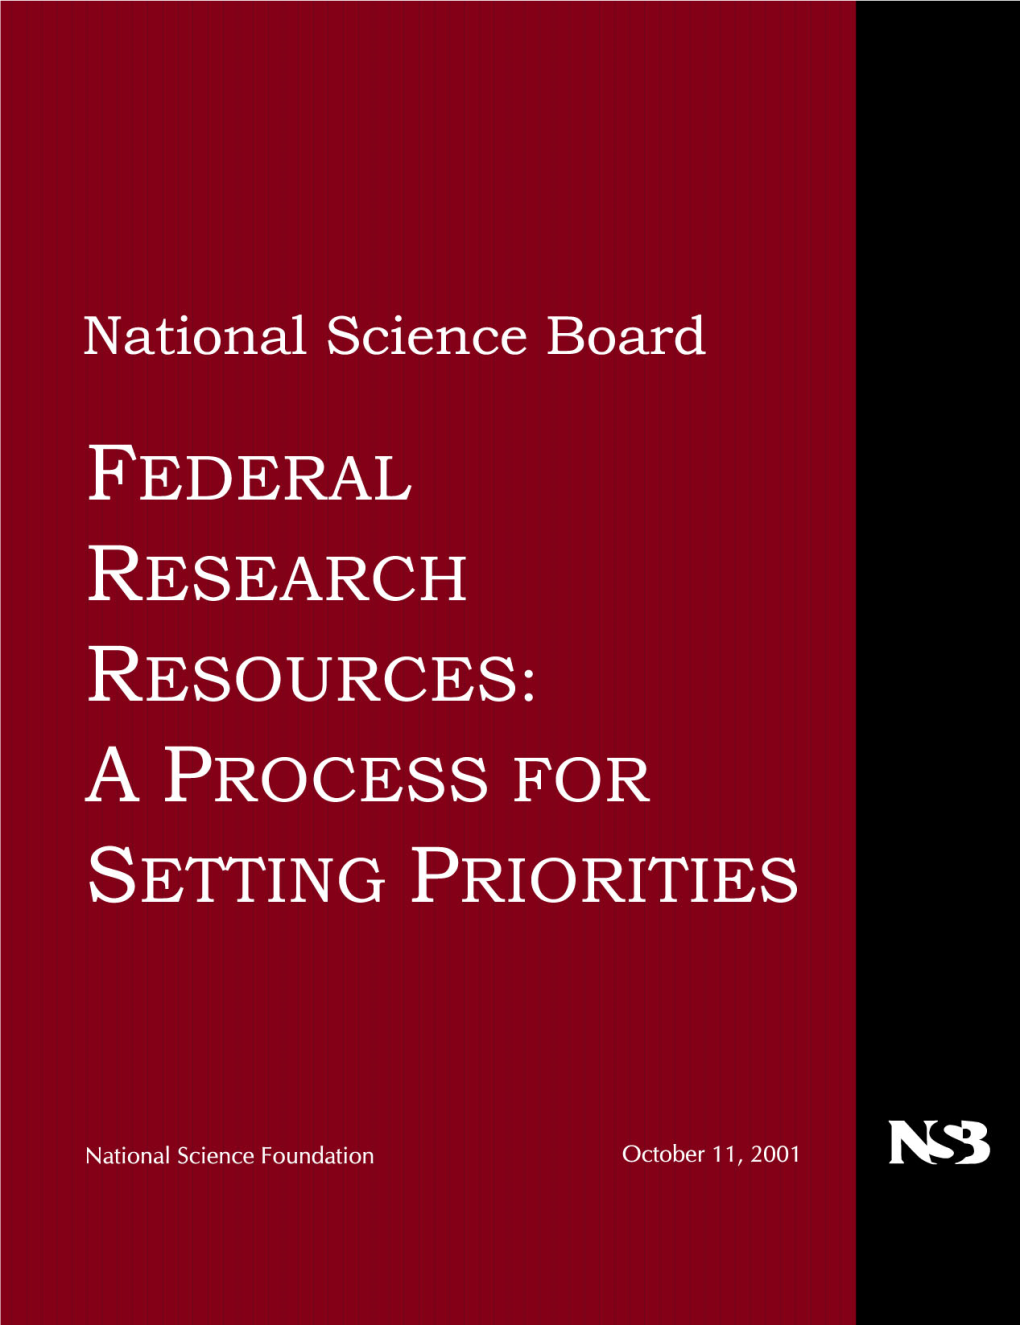 Federal Research Resources: a Process for Setting Priorities